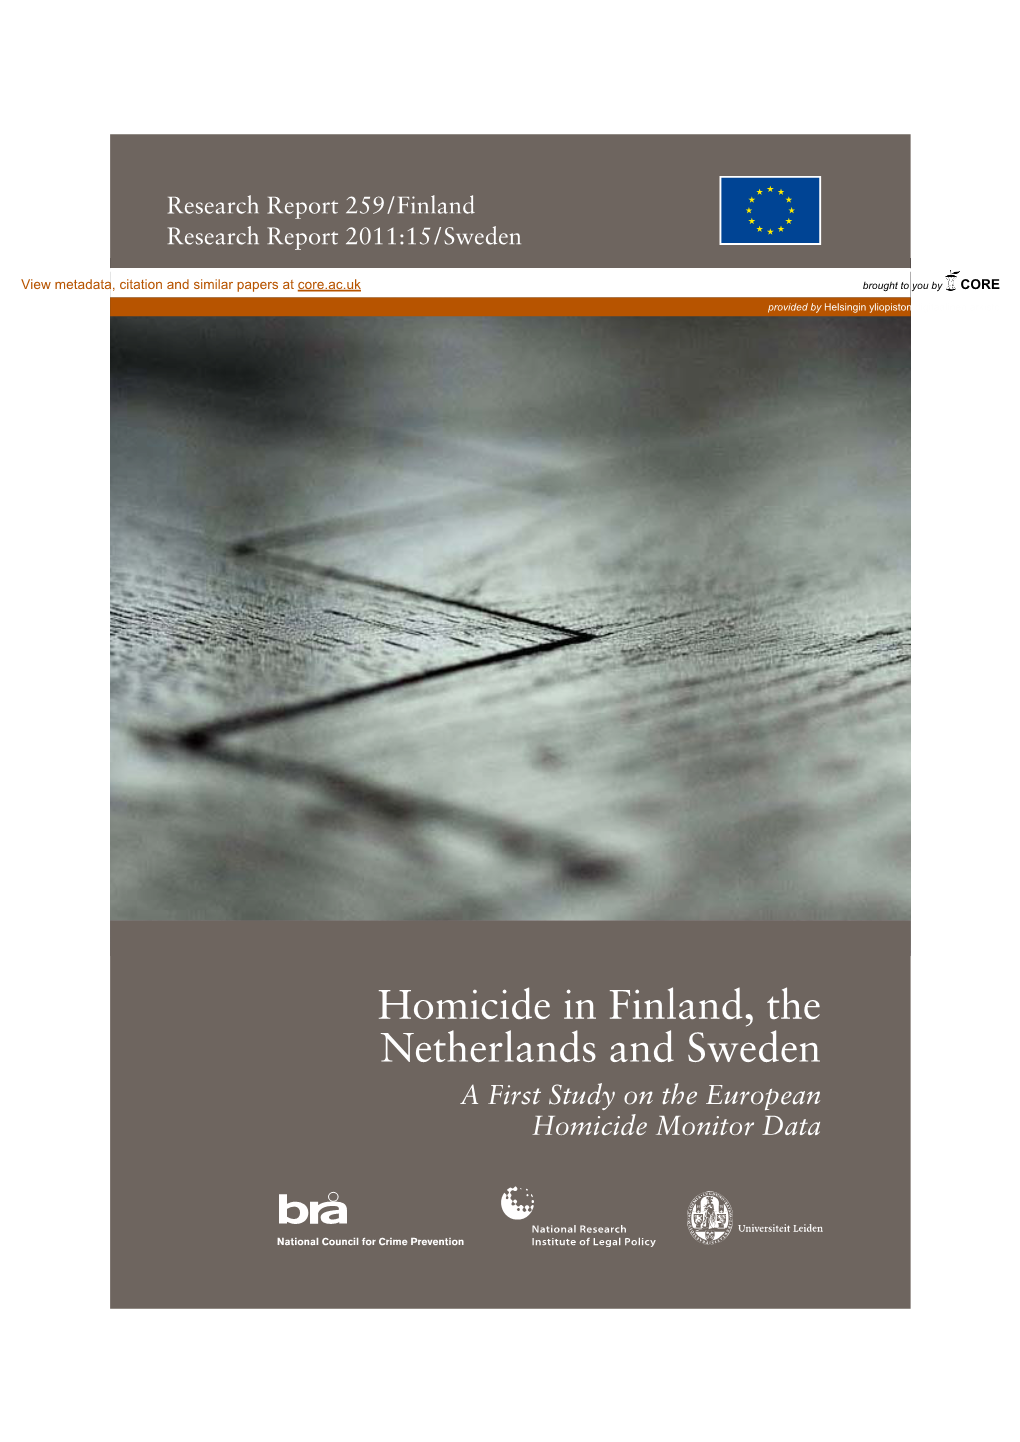 Homicide in Finland, the Netherlands and Sweden a First Study on the European Homicide Monitor Data